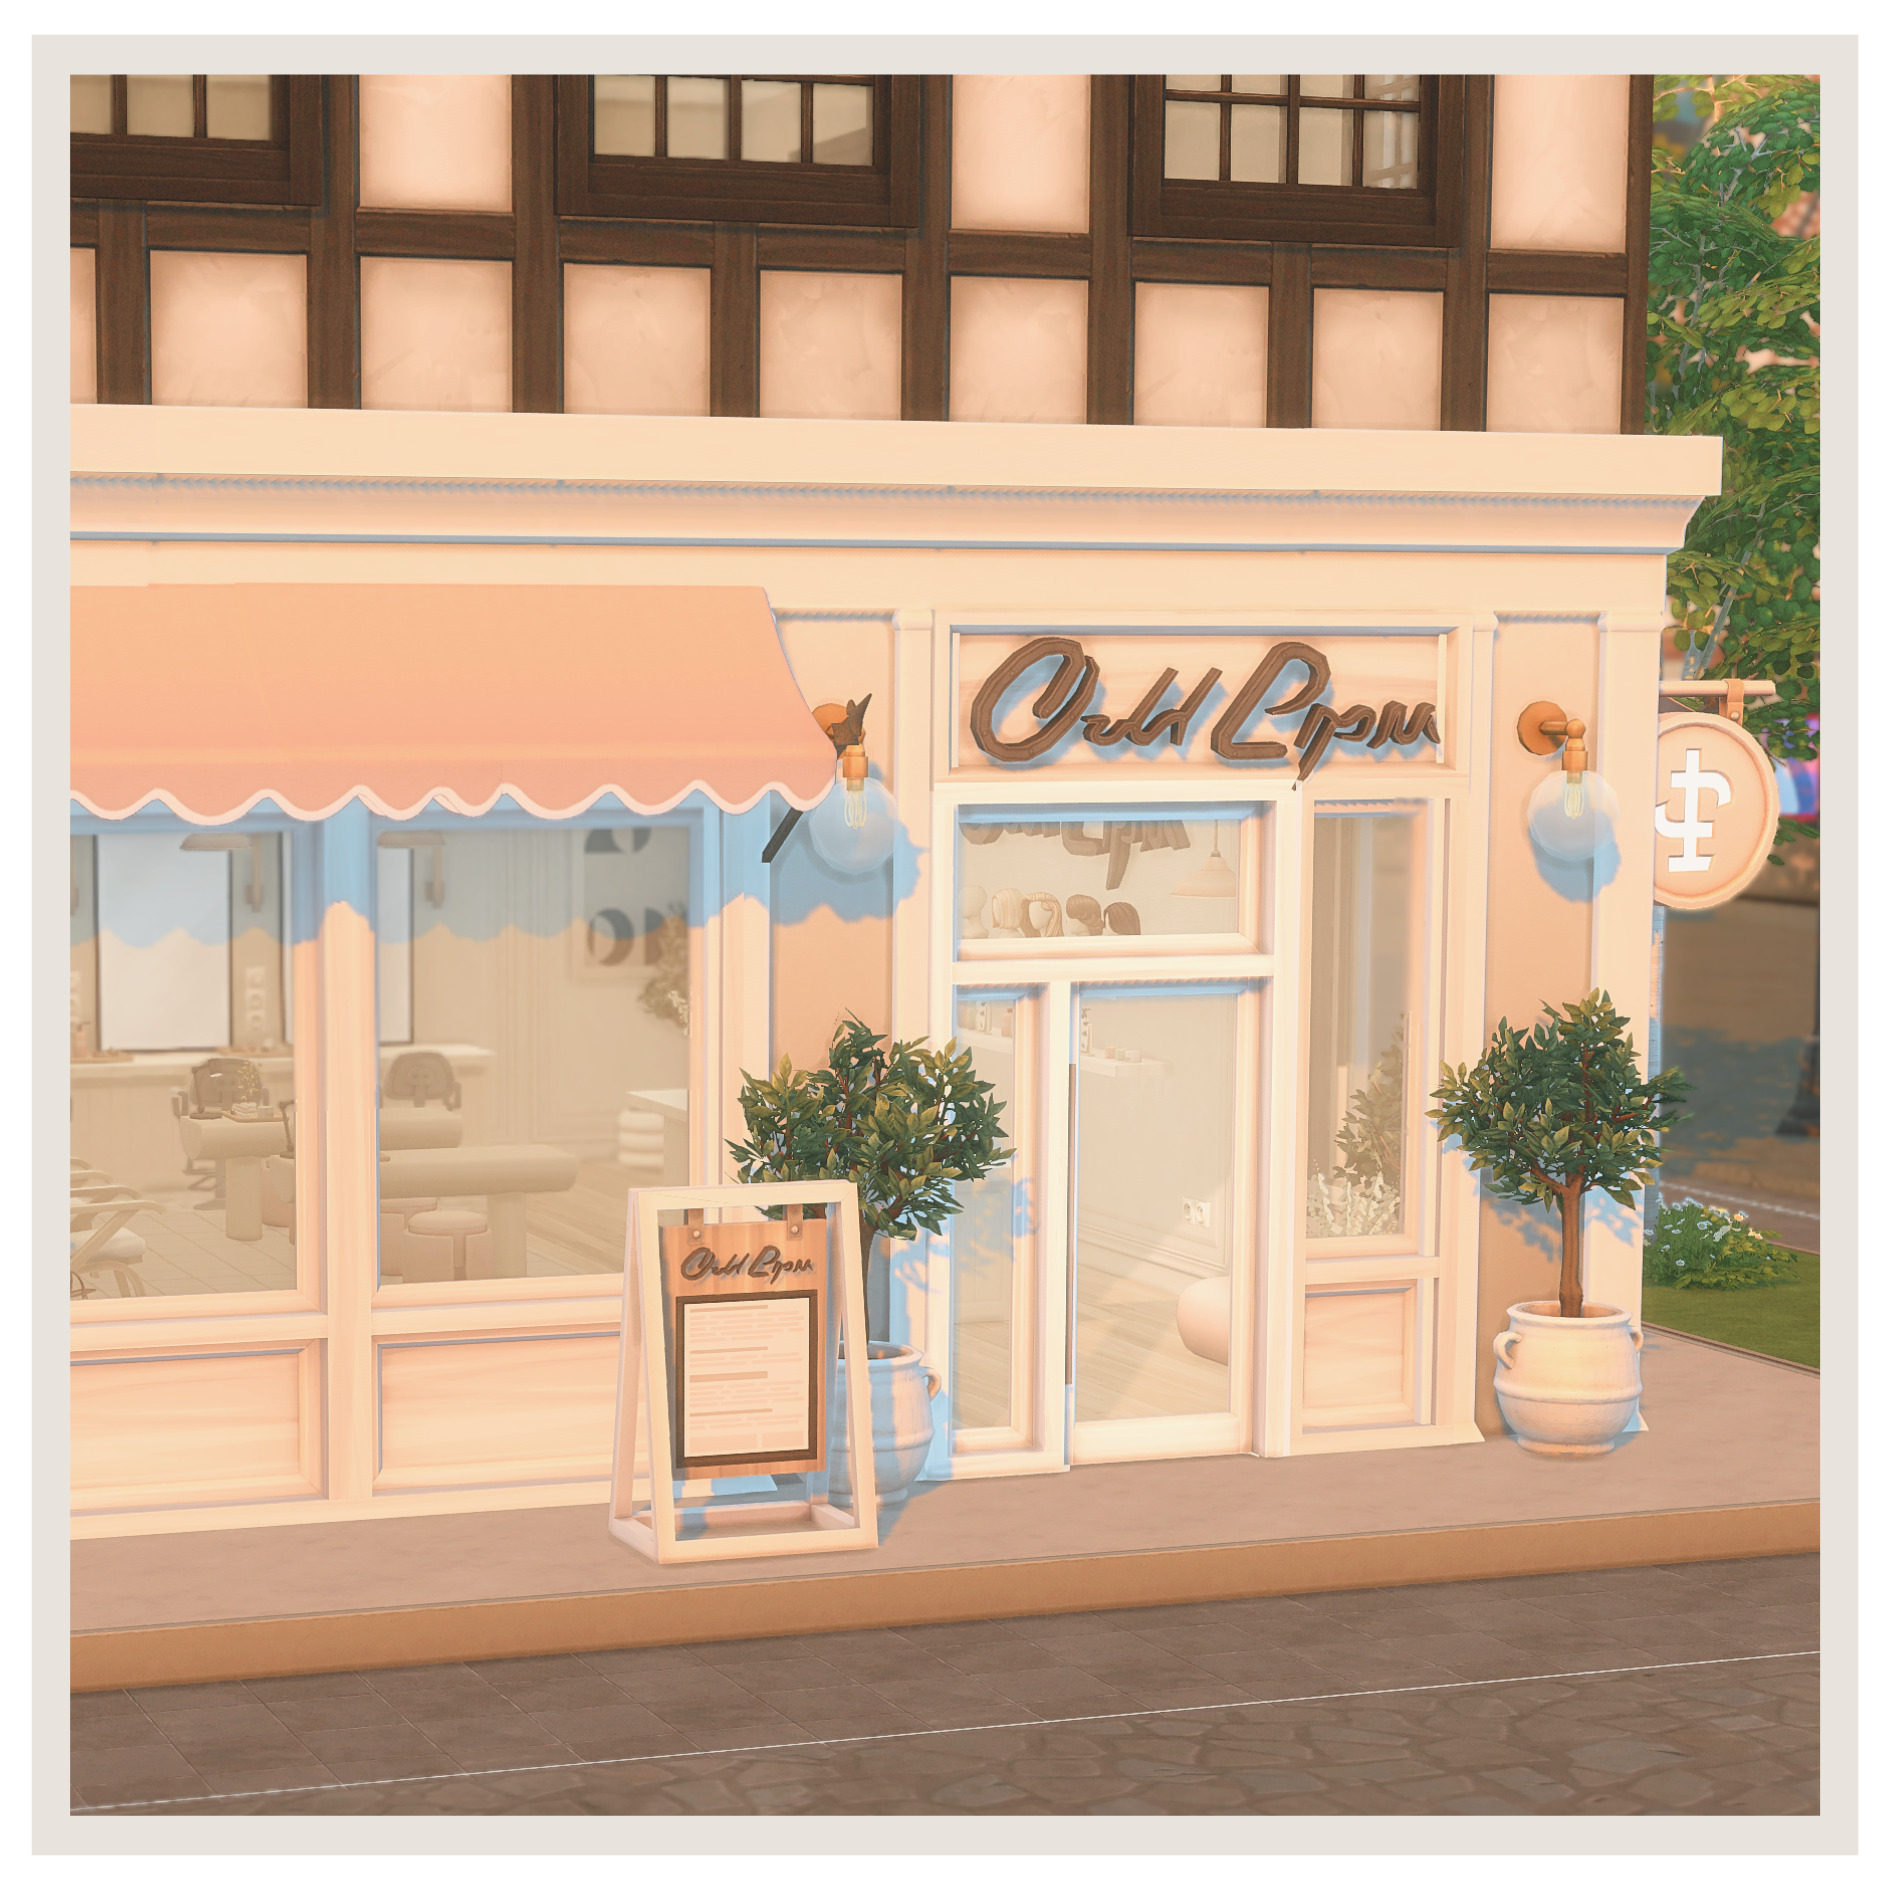 bbygyal ♡ : welcome to the old town salon in windenburg...